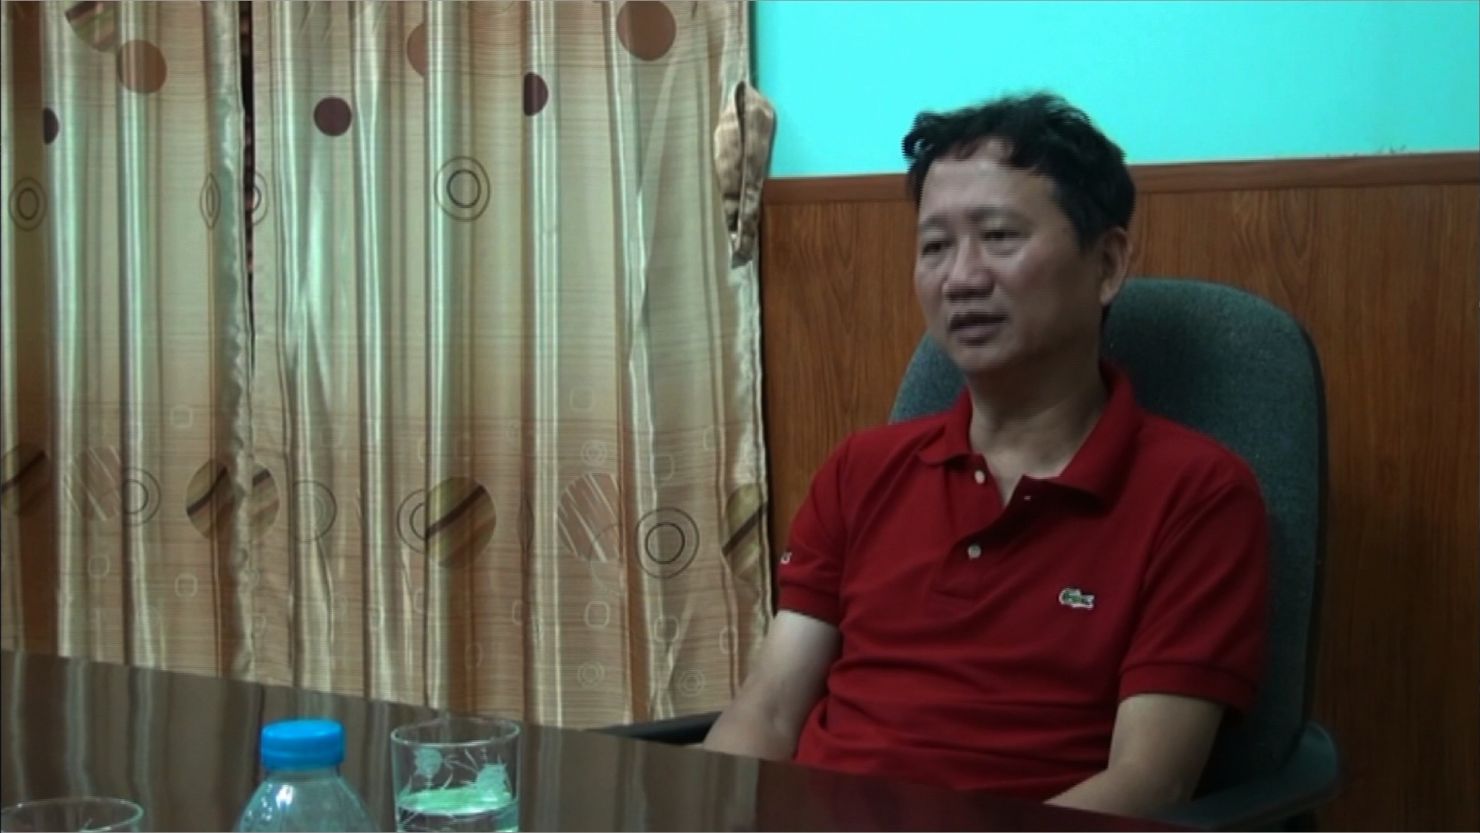 Vietnamese asylum seeker Trinh Xuan Thanh as he appeared on state media Thursday following his return to Hanoi